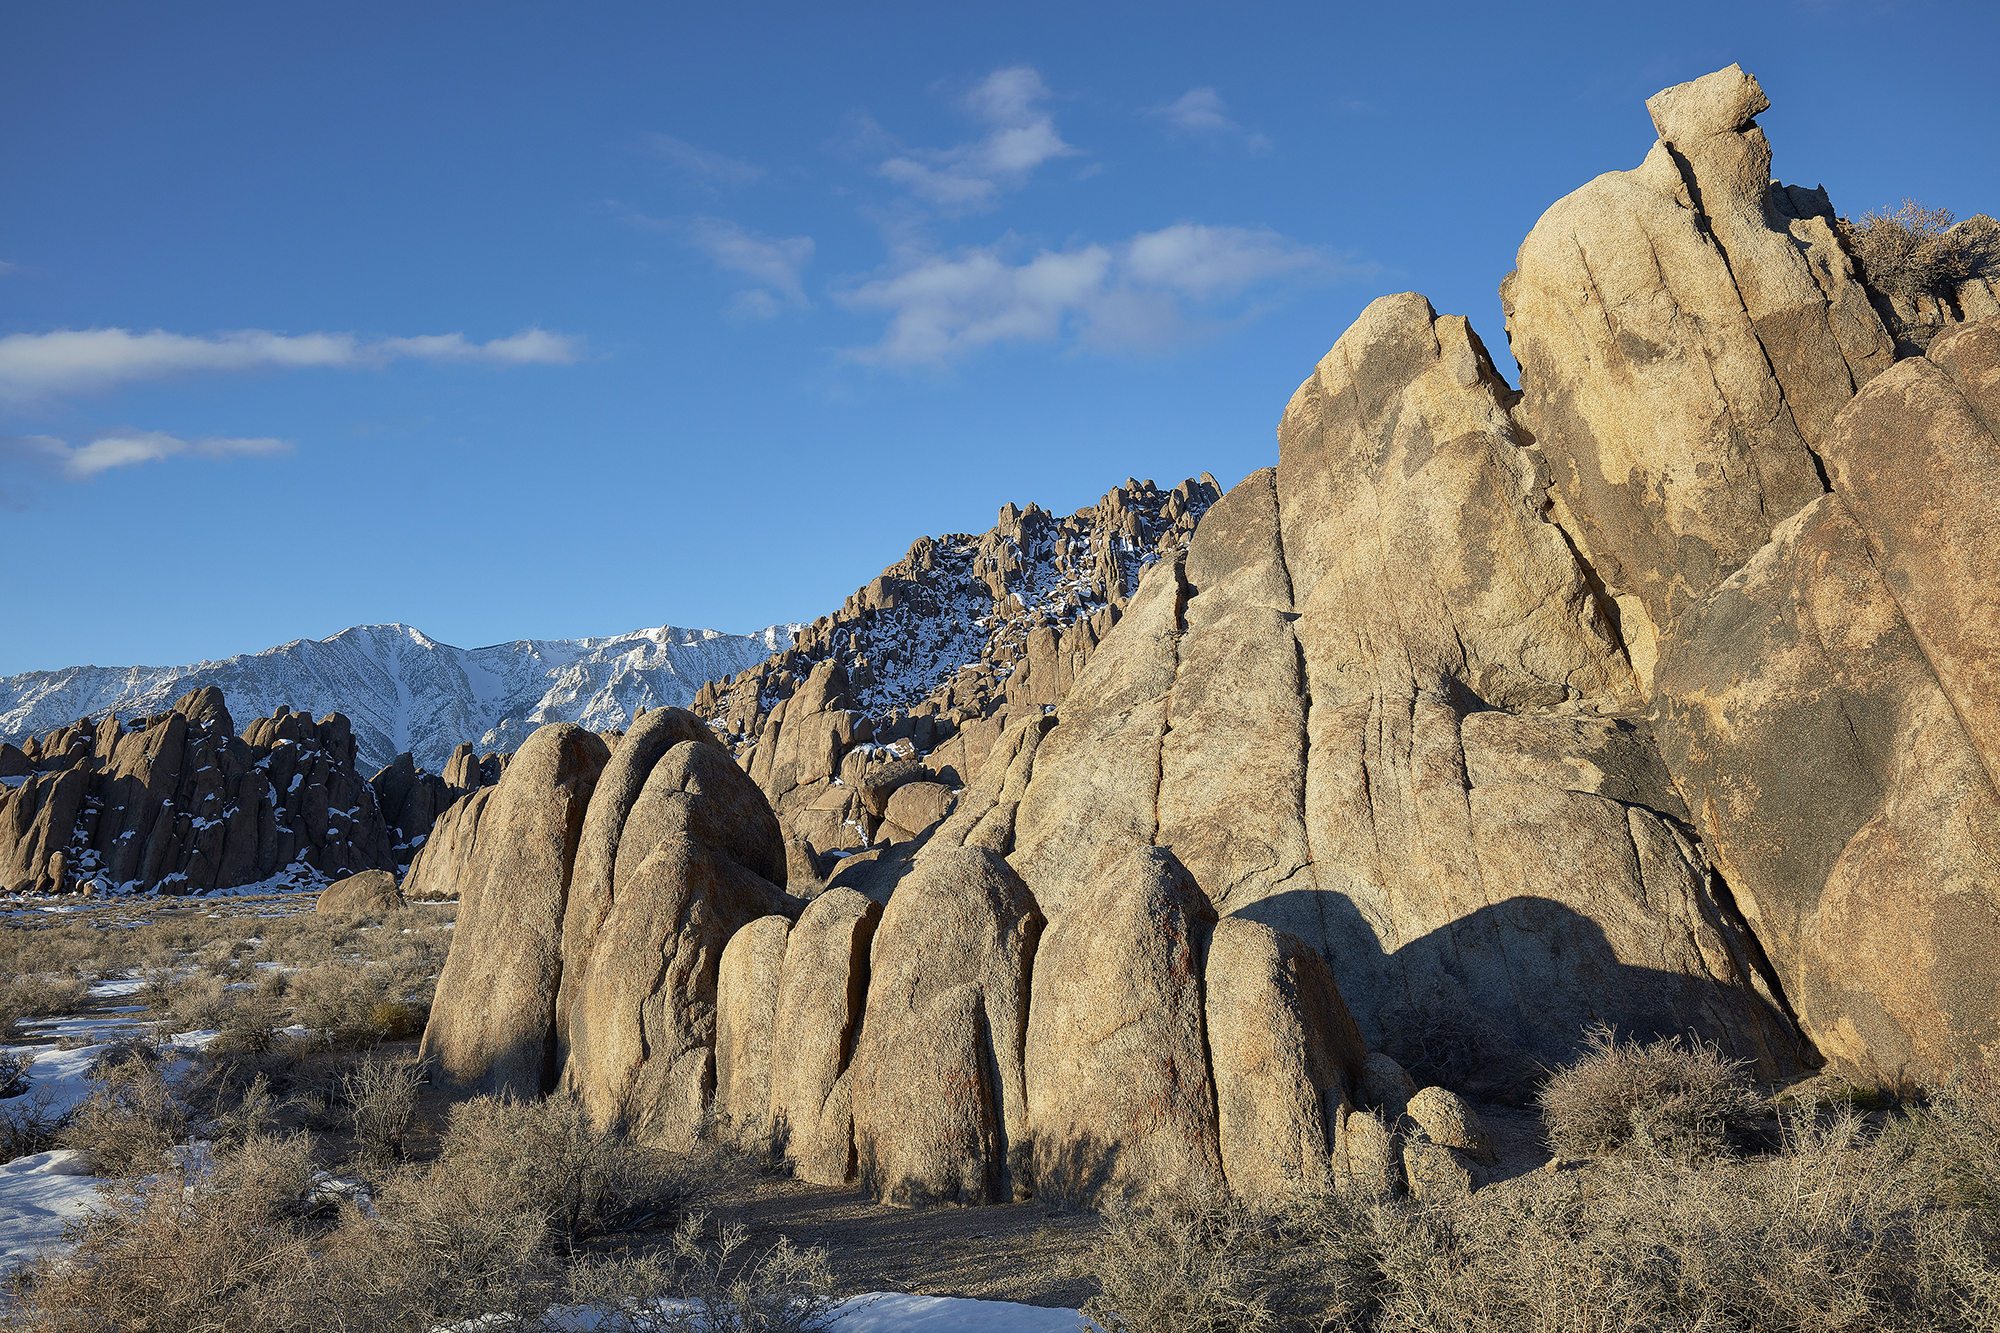 A rock formation from the Alabama hills